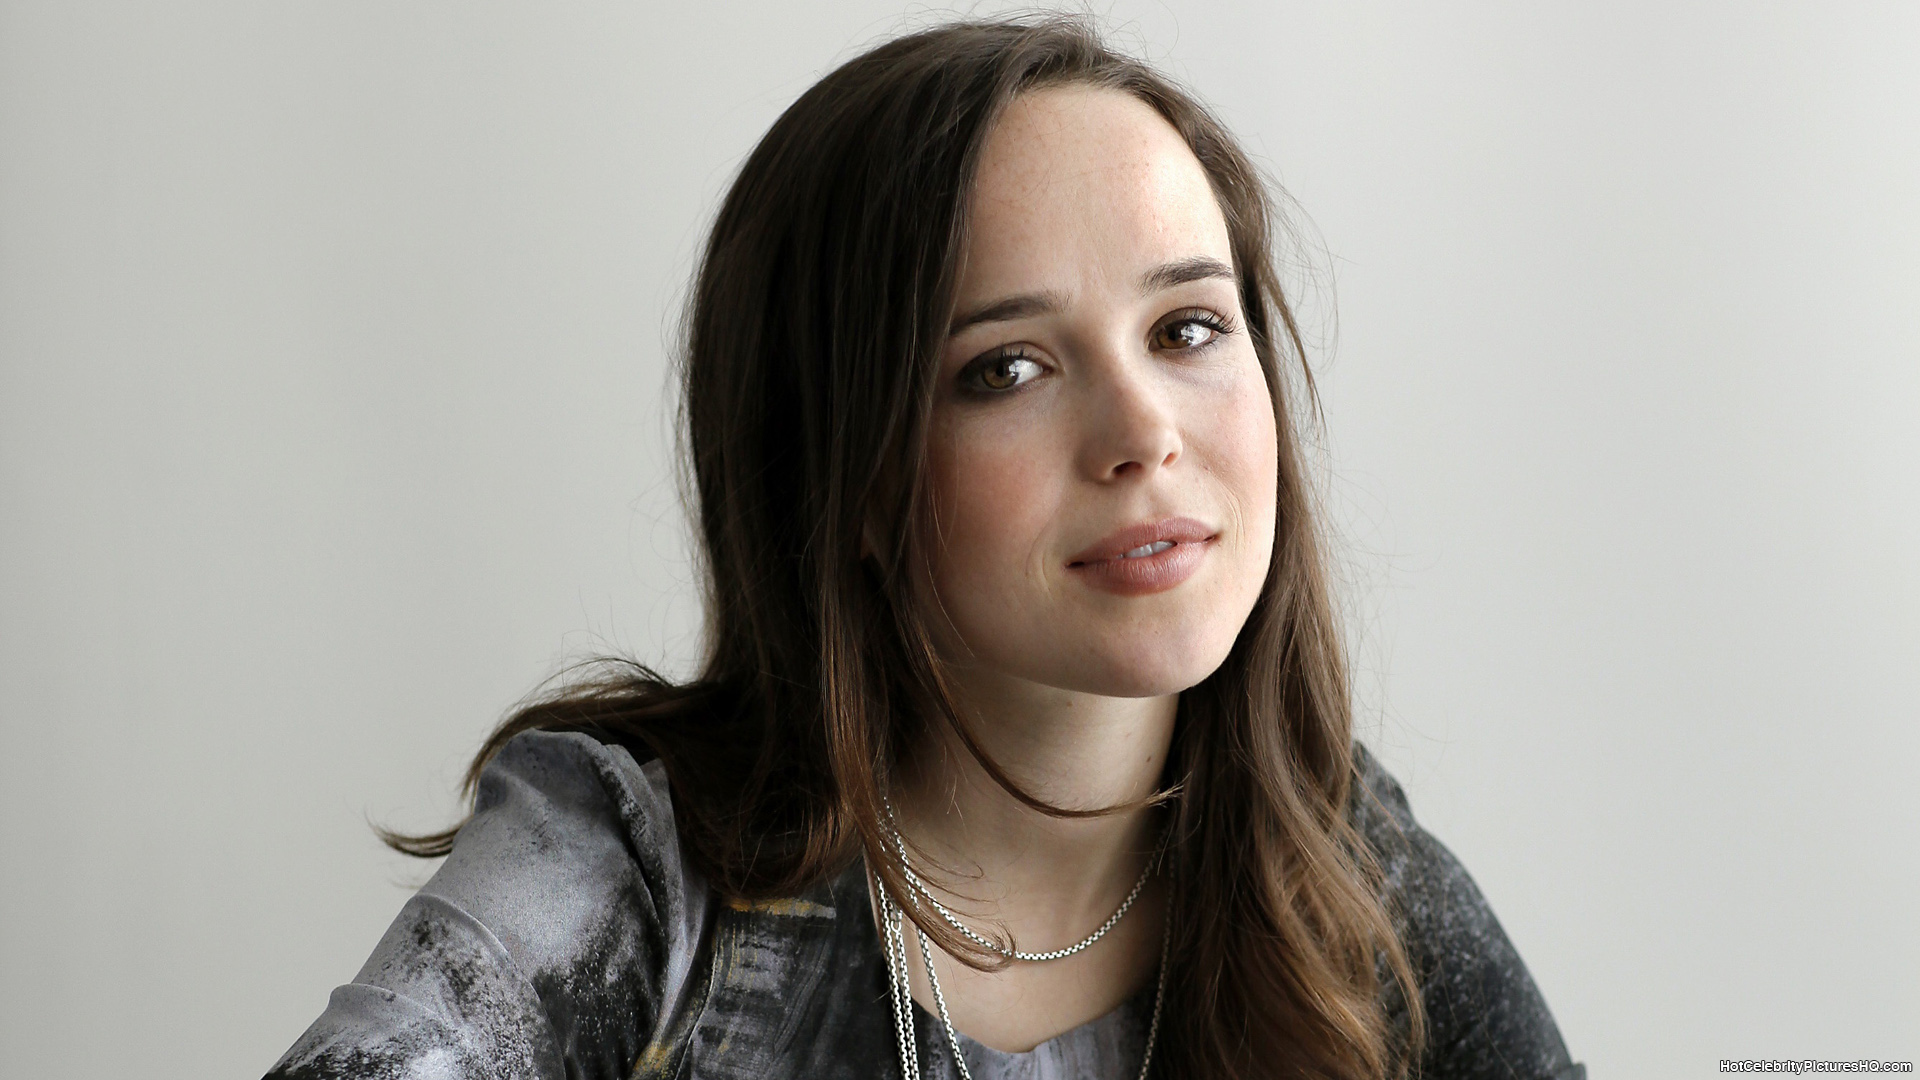 Beyond two souls naked ellen page